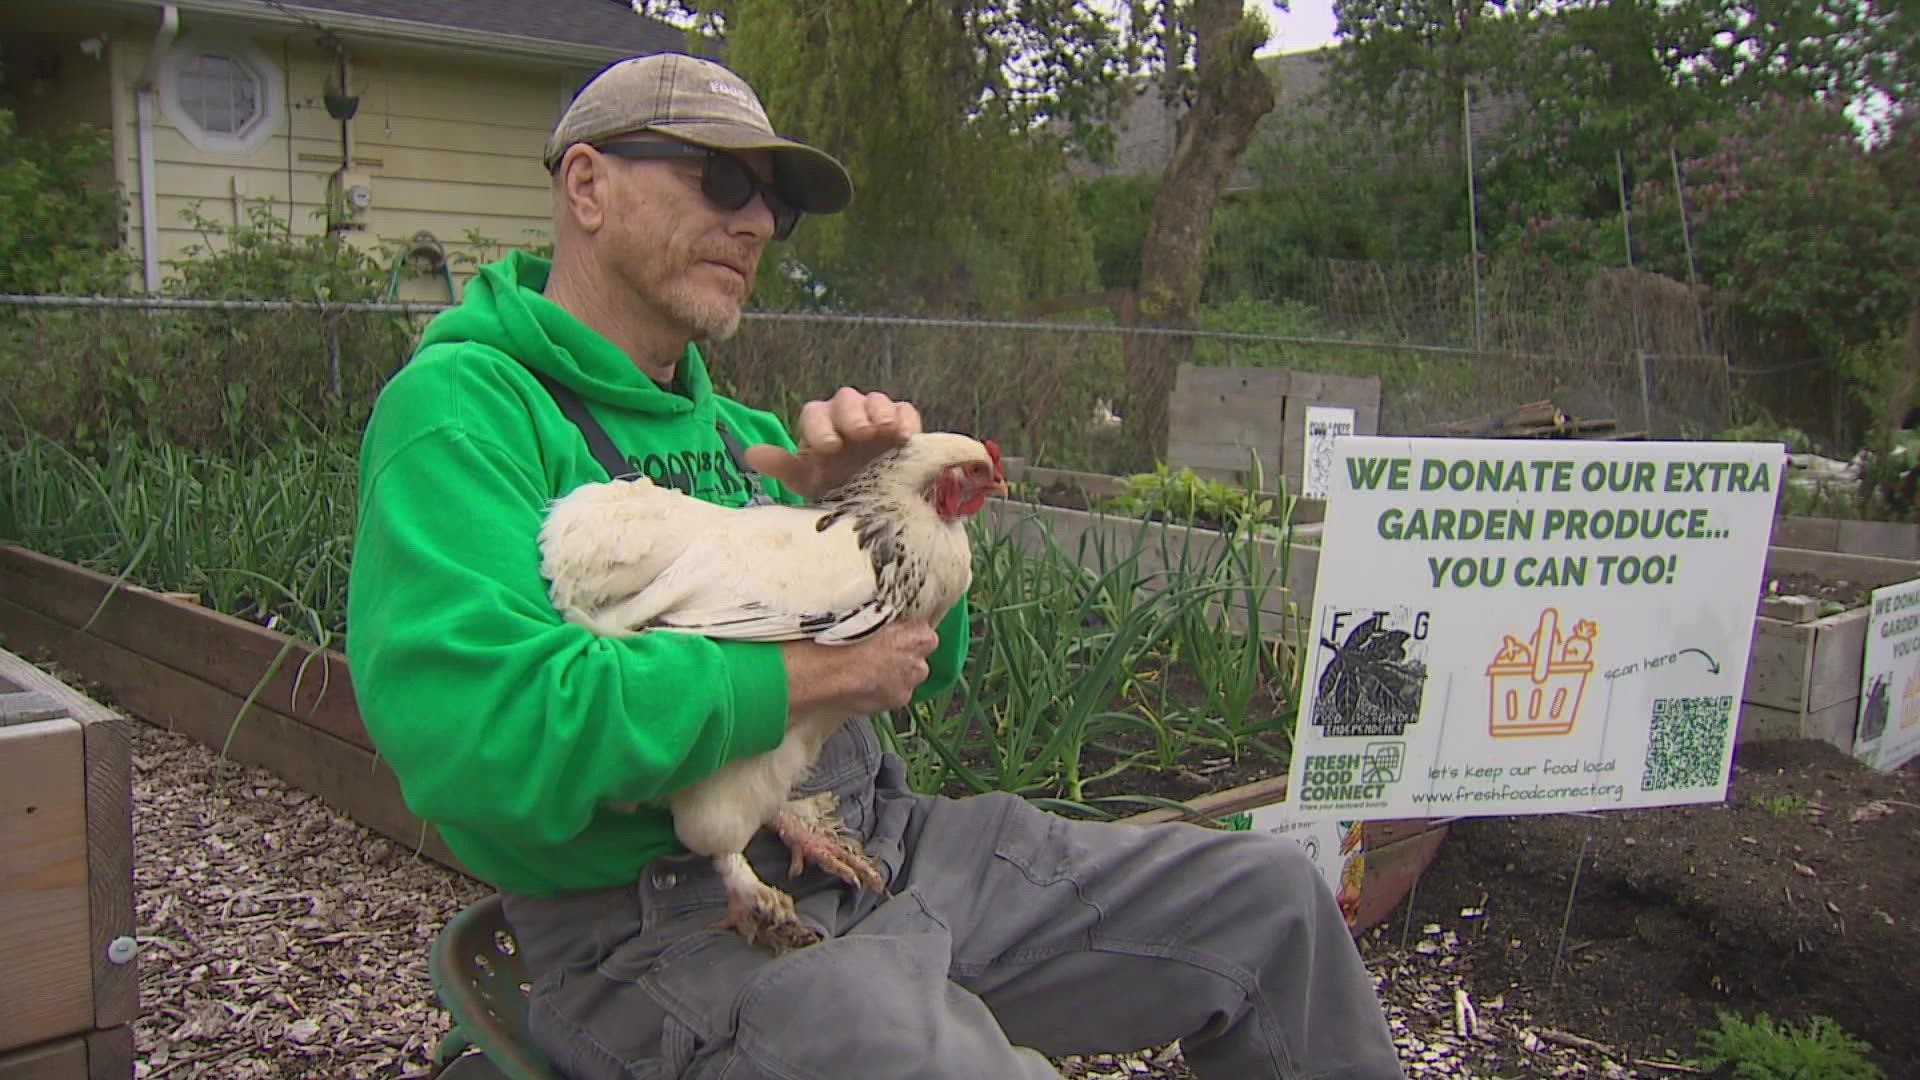 The highly contagious H5N1 virus was found in two non-commercial backyard flocks in Pierce County.